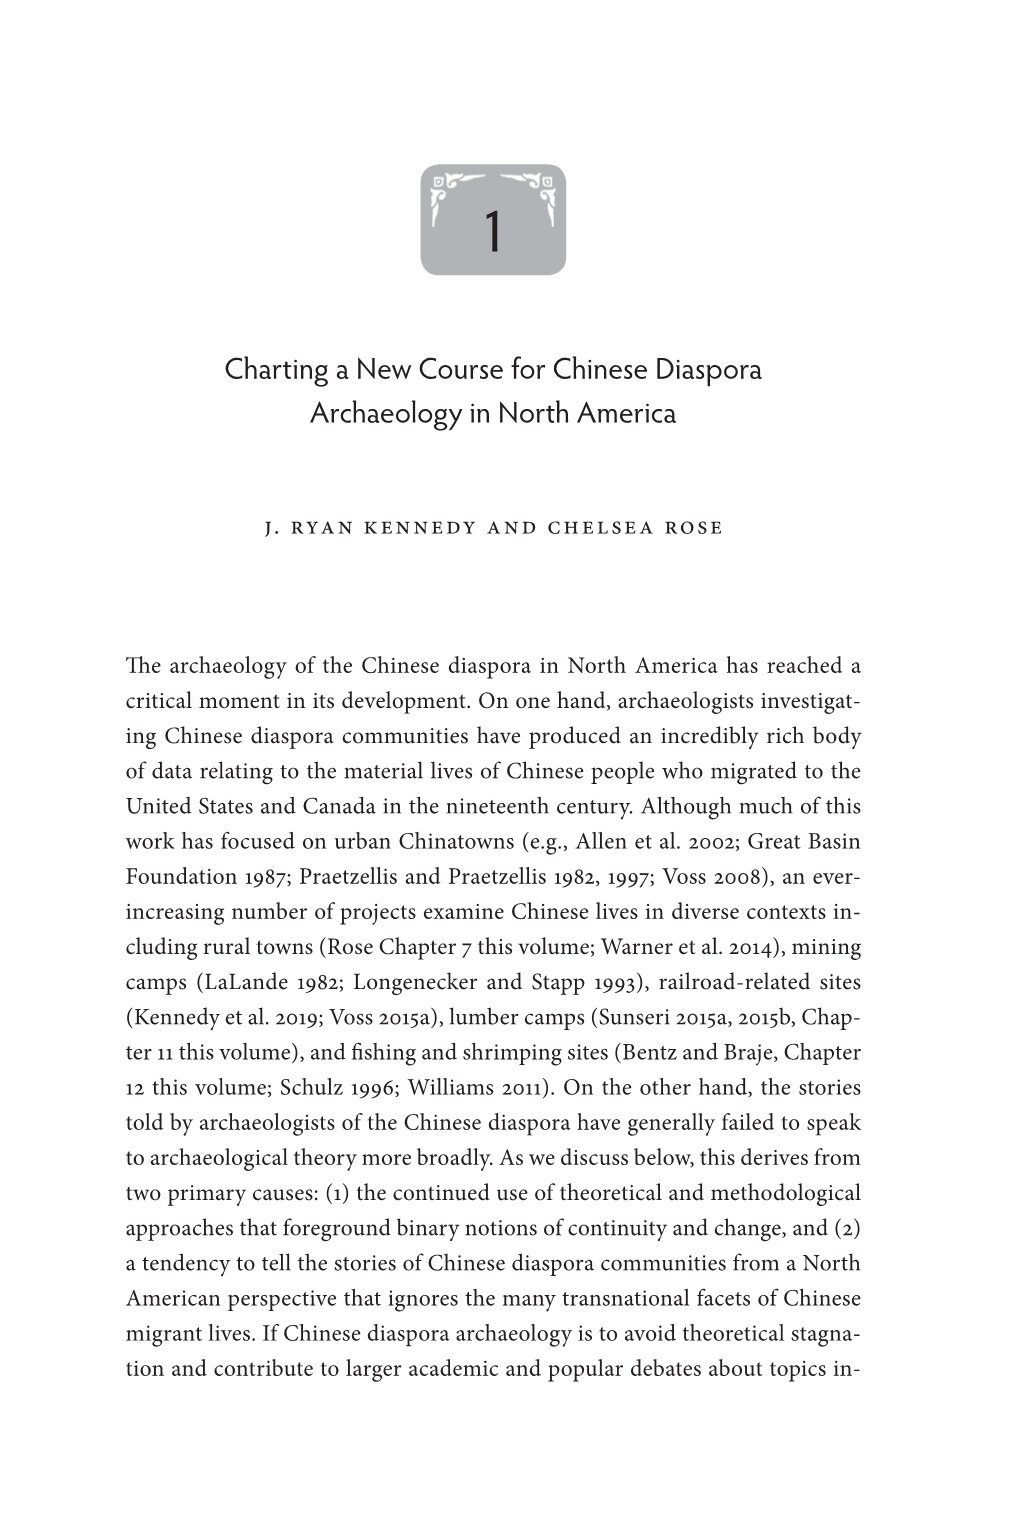 Charting a New Course for Chinese Diaspora Archaeology in North America